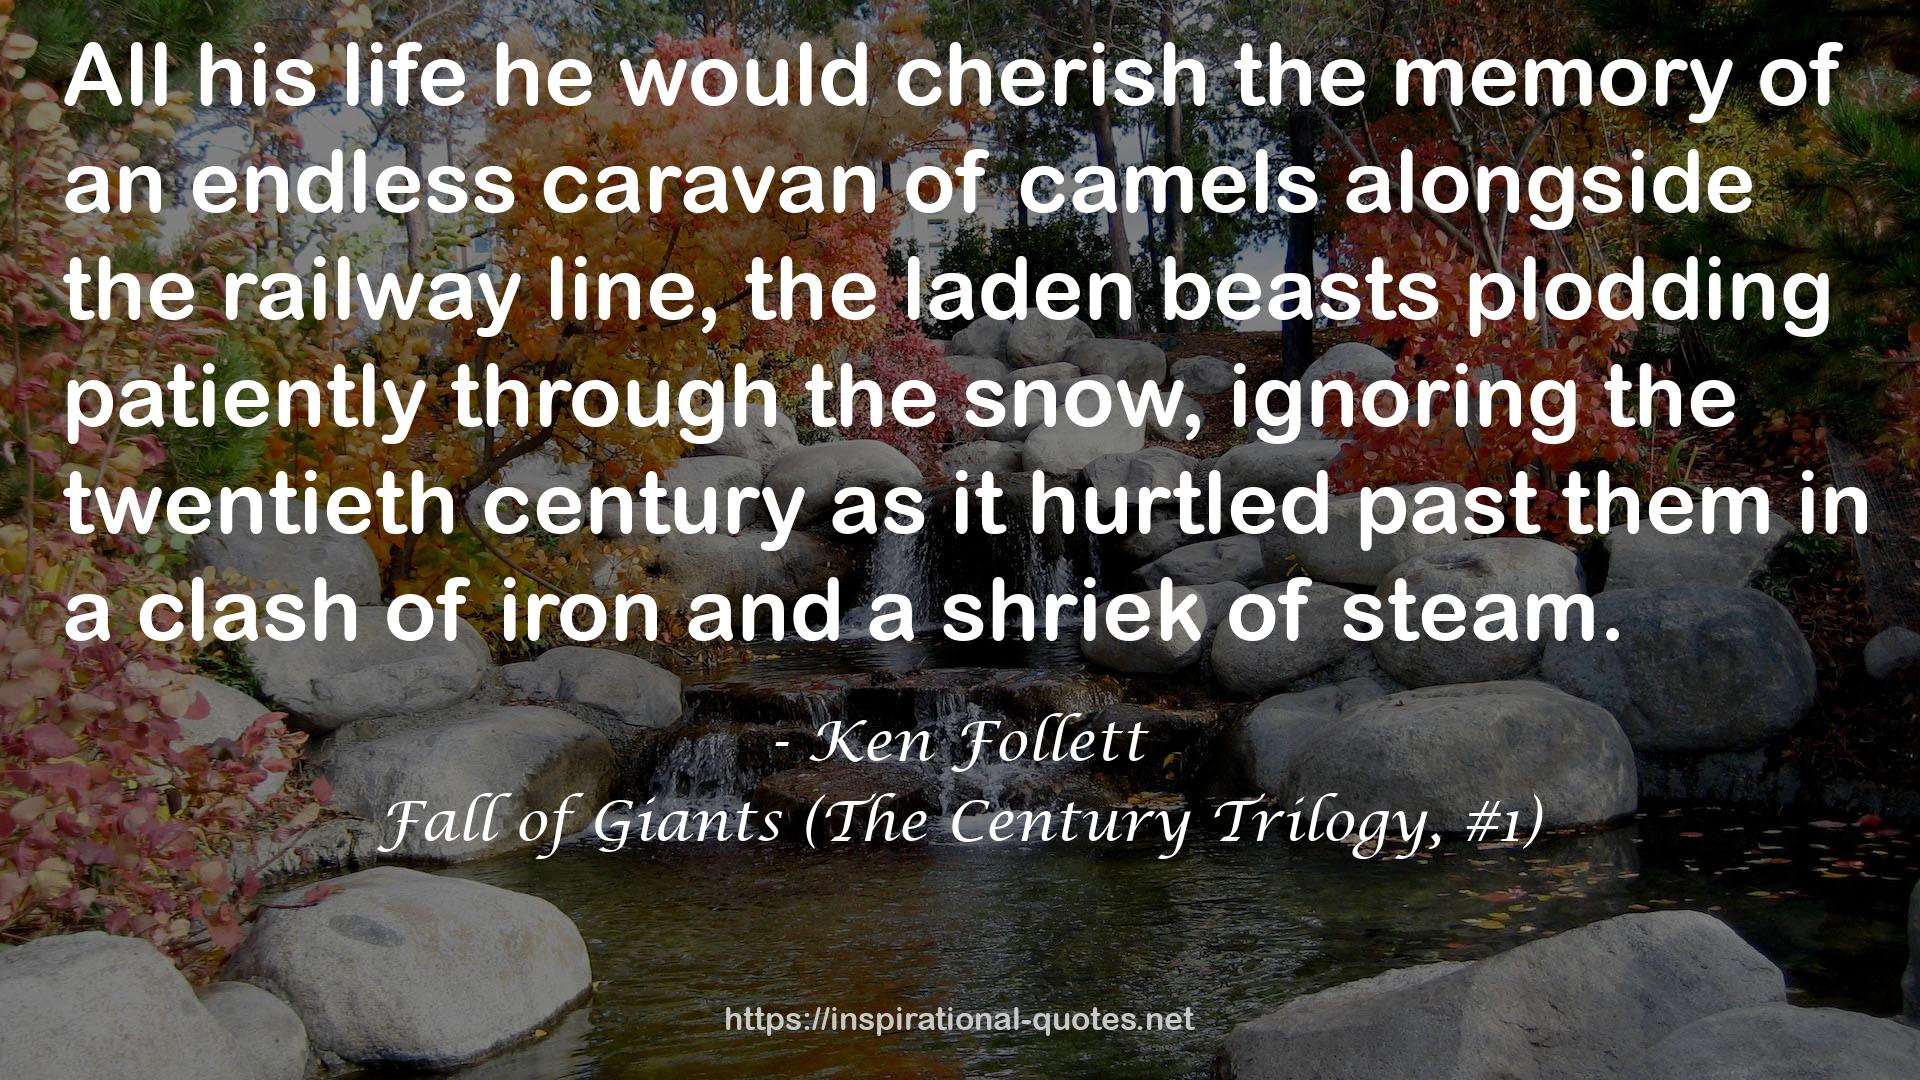 Fall of Giants (The Century Trilogy, #1) QUOTES